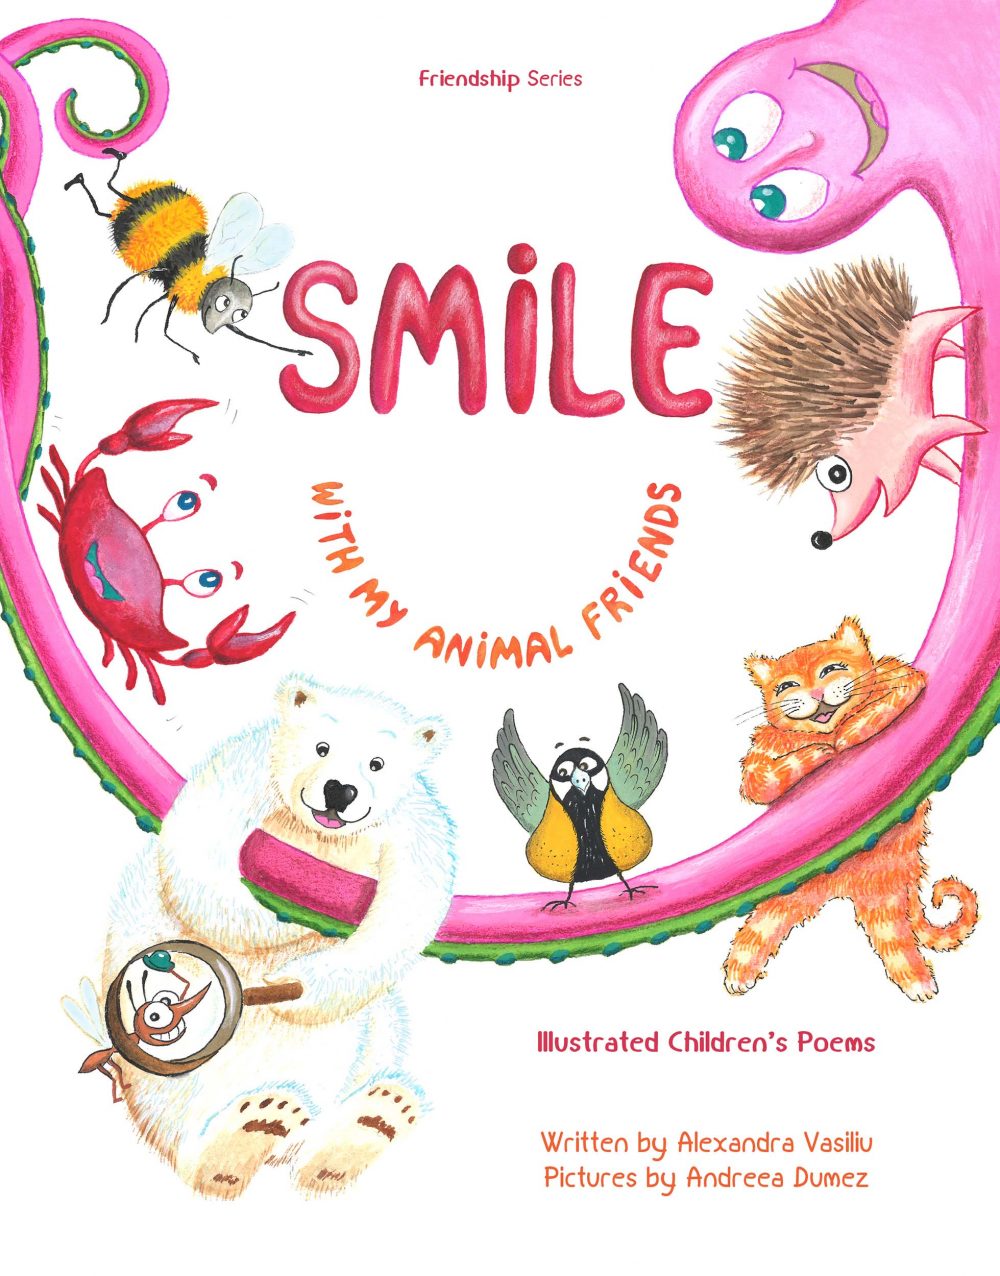 The front cover for the children's book "Smile With My Animal Friends"